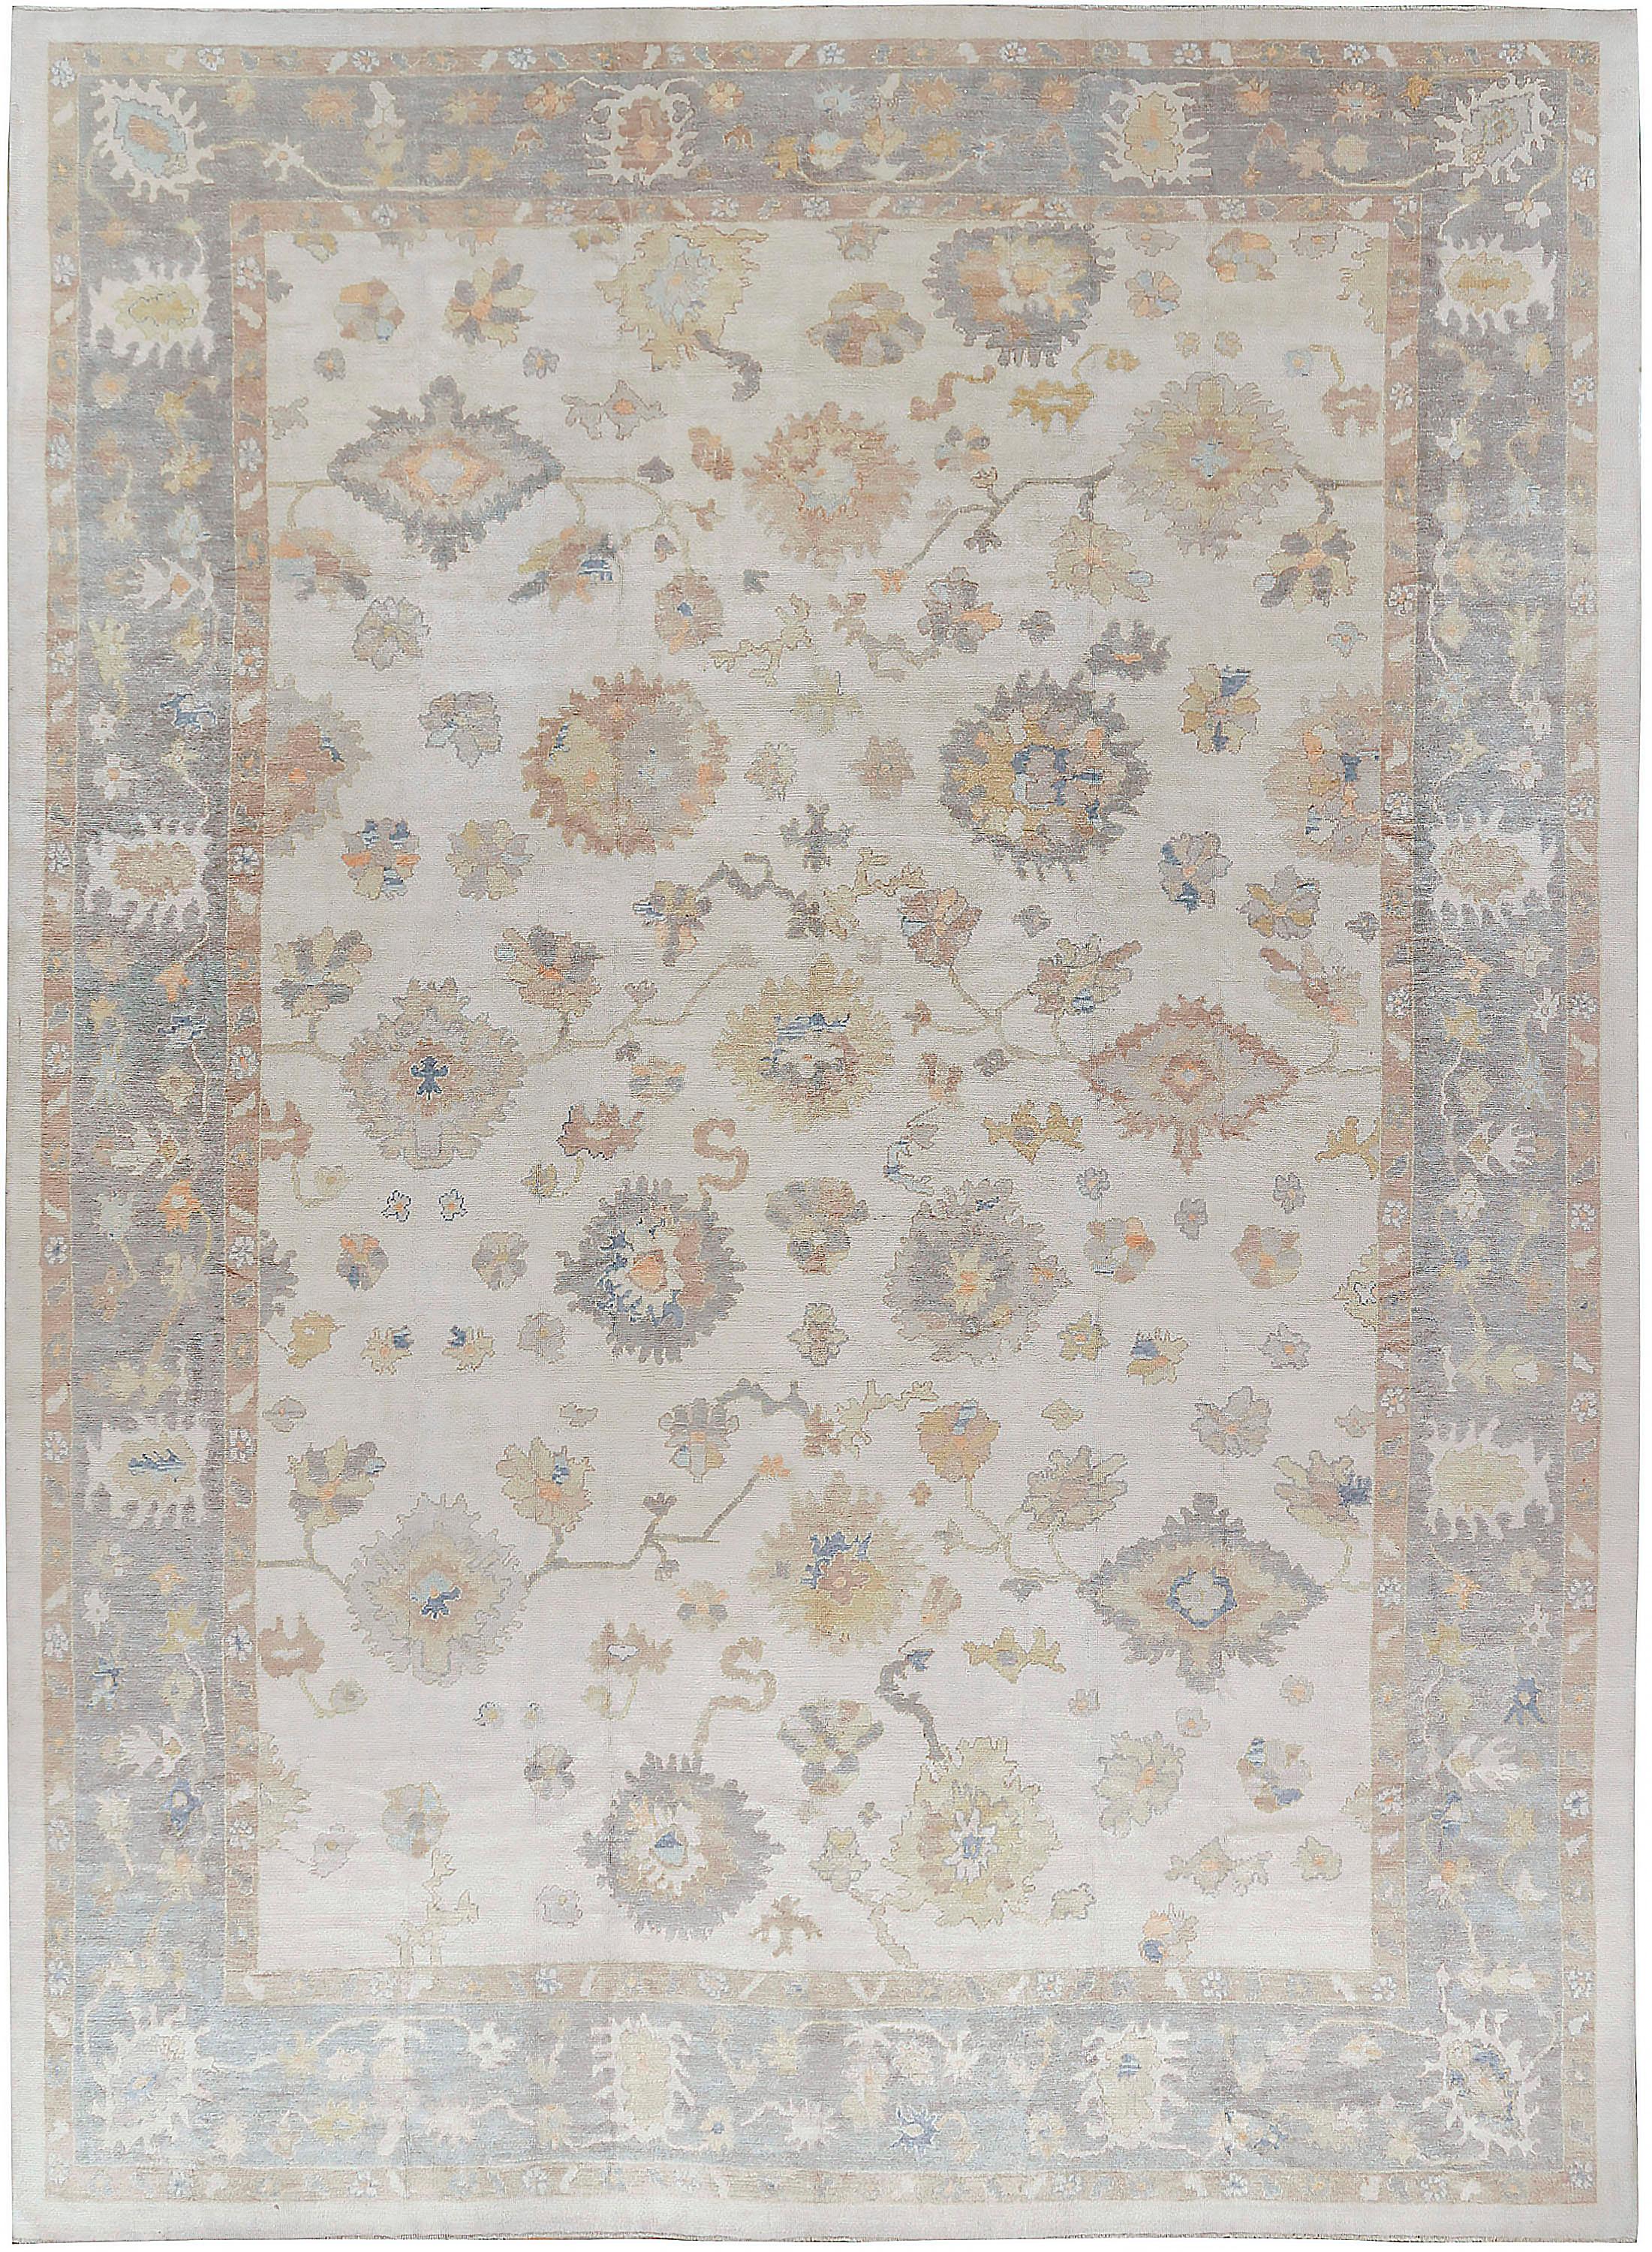 Oversize Oushak style handwoven carpet rug, 14'4 x 20'8. Handwoven in Turkey using the finest of materials this is a Classic recreation of an Oushak rug in soft colors.